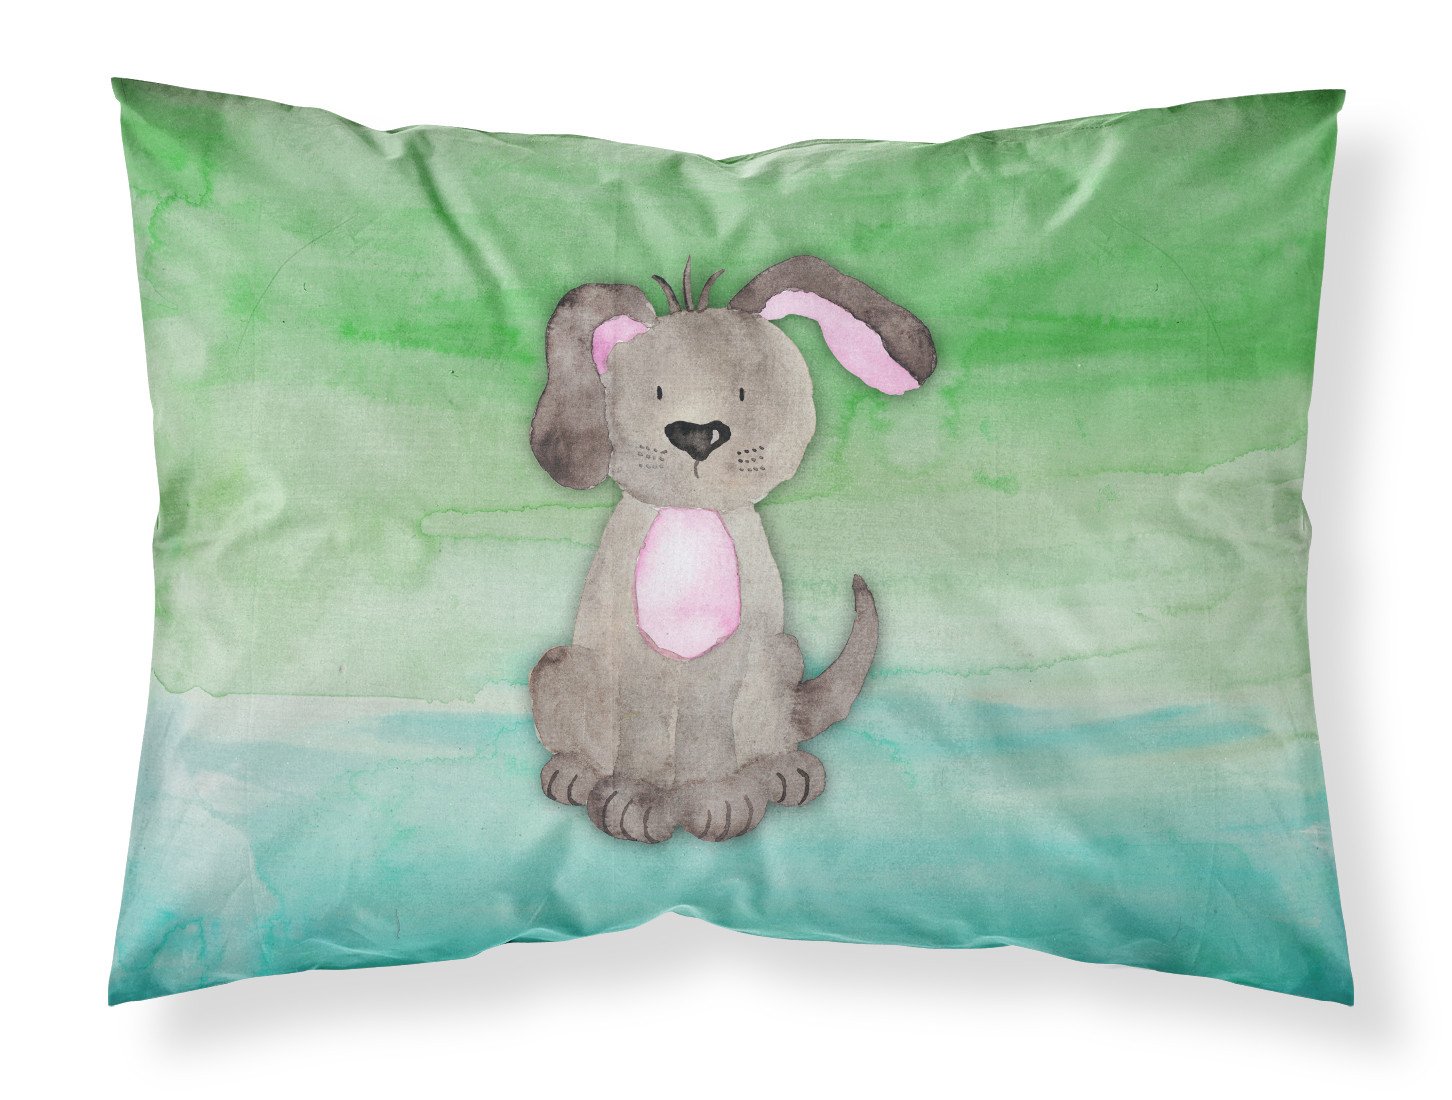 Dog Teal and Green Watercolor Fabric Standard Pillowcase BB7357PILLOWCASE by Caroline's Treasures